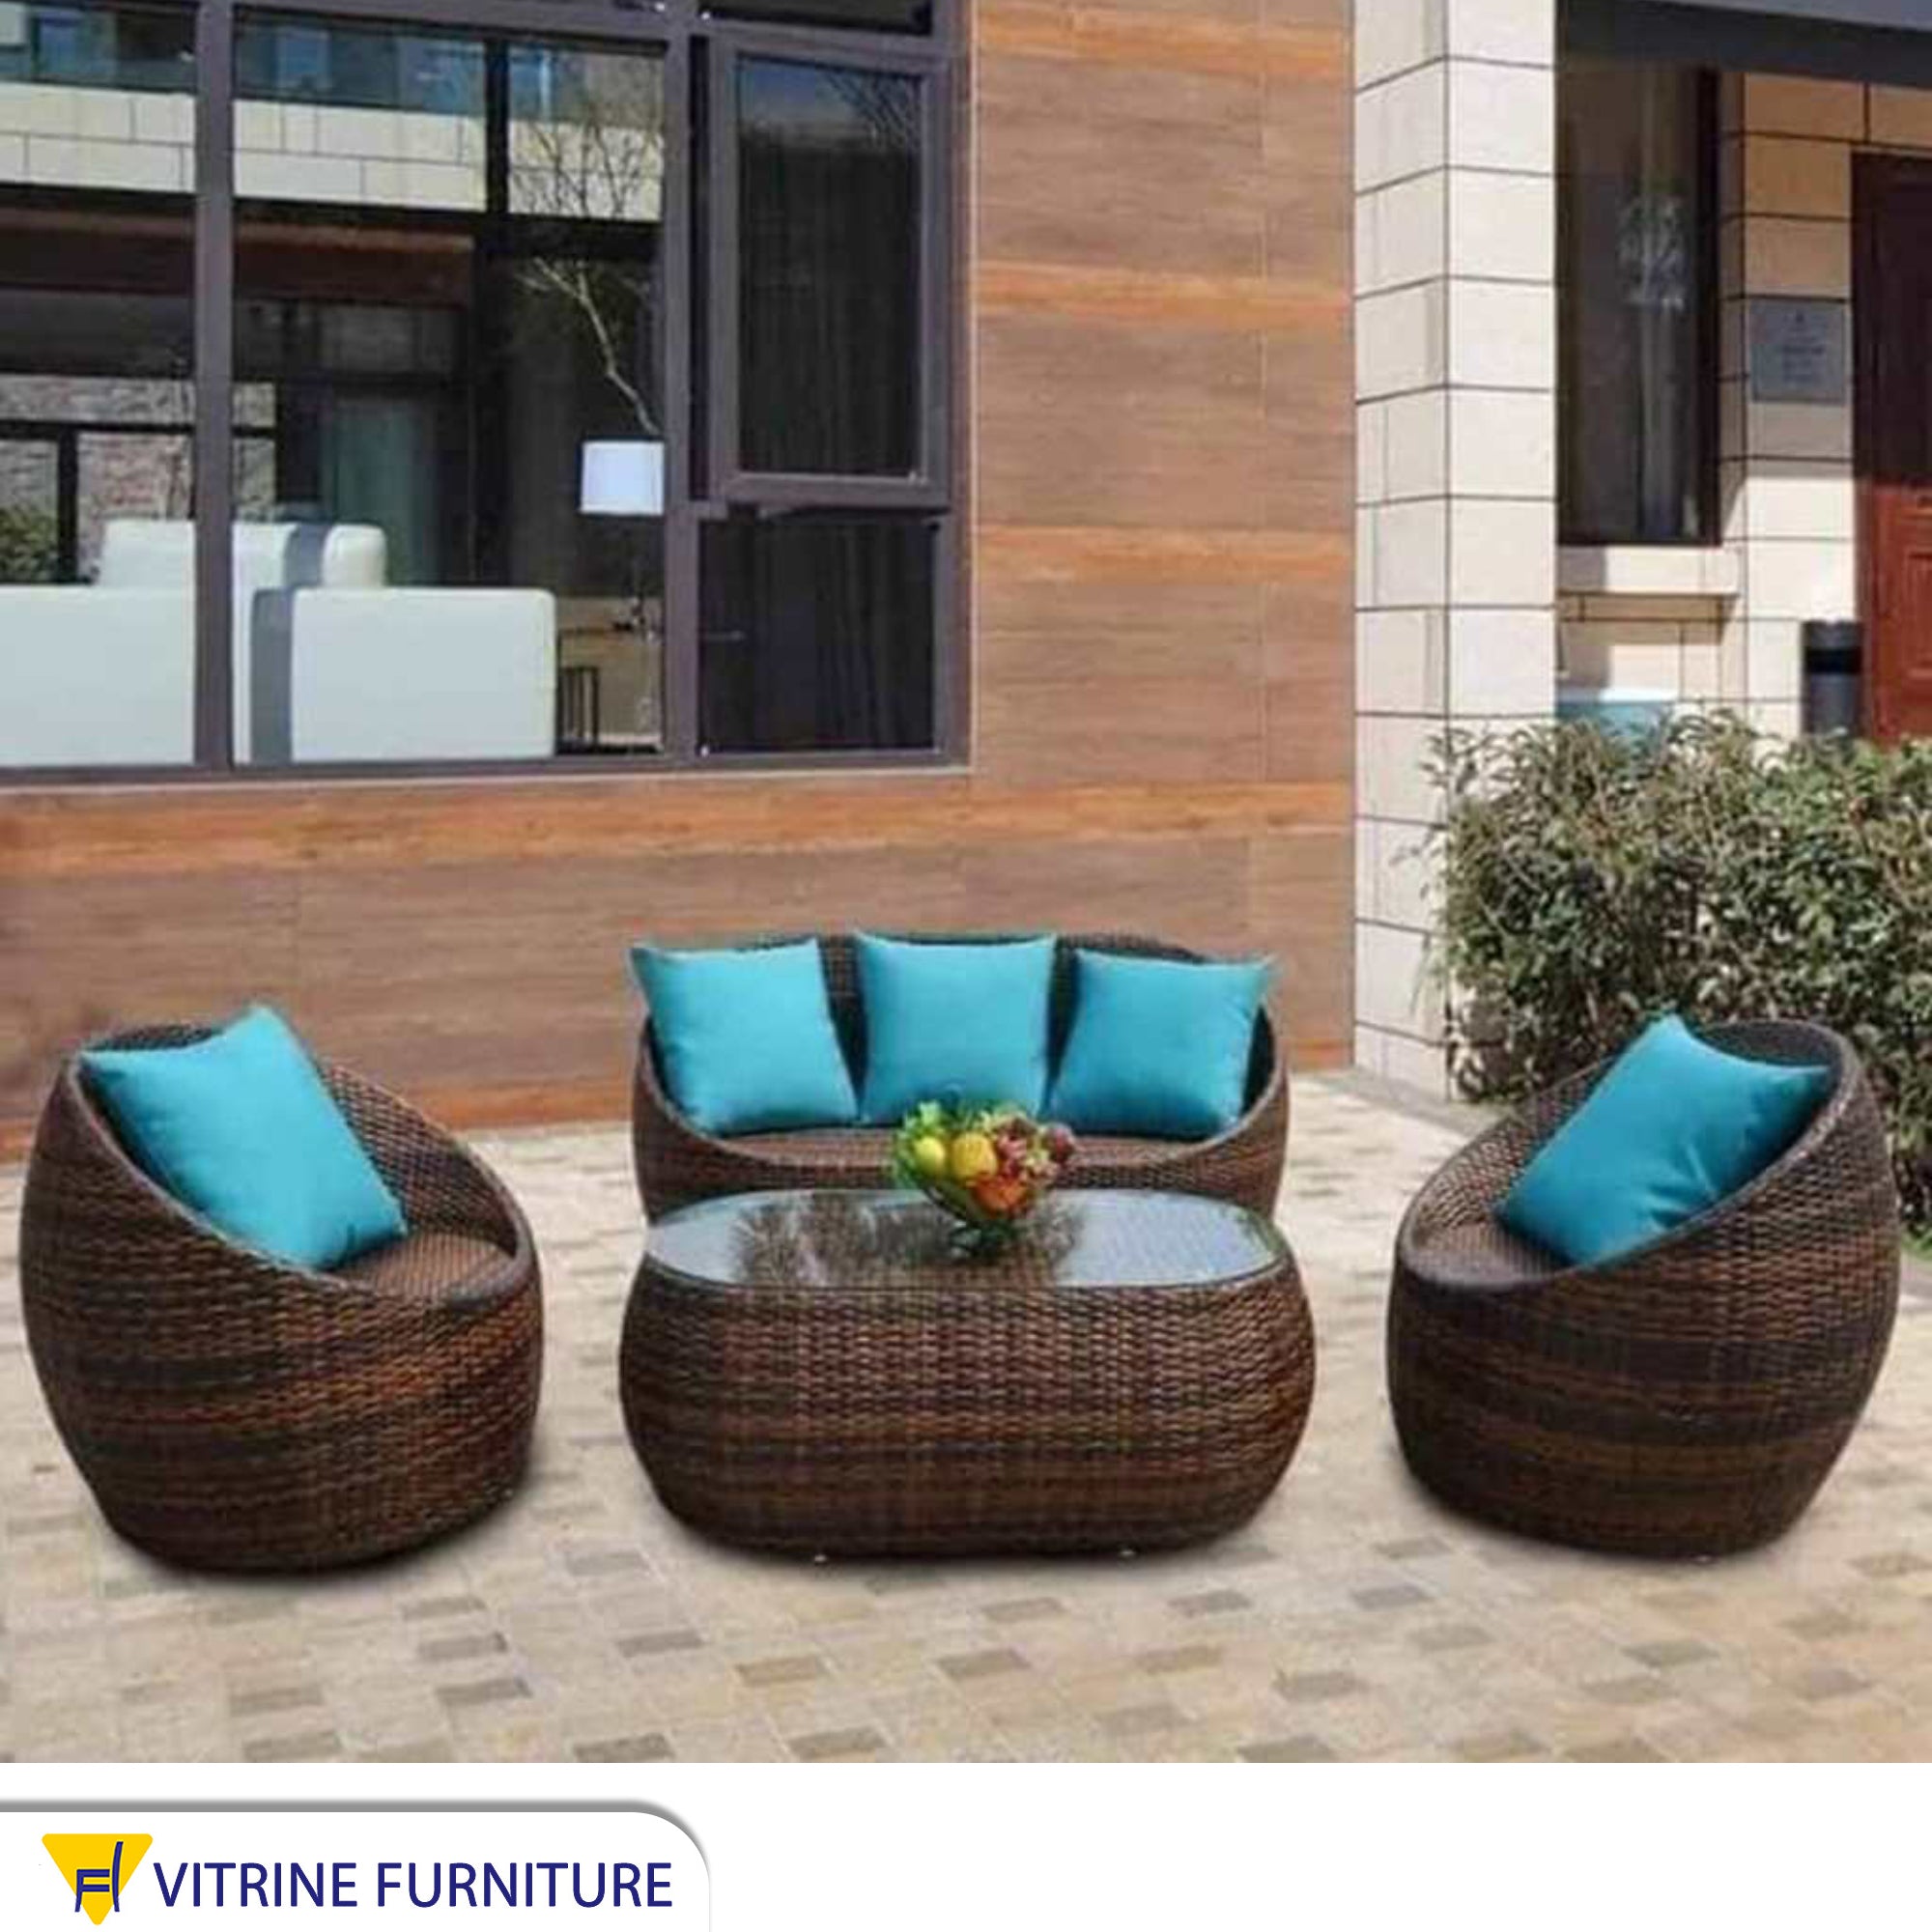 An outdoor seating set with an exceptional design